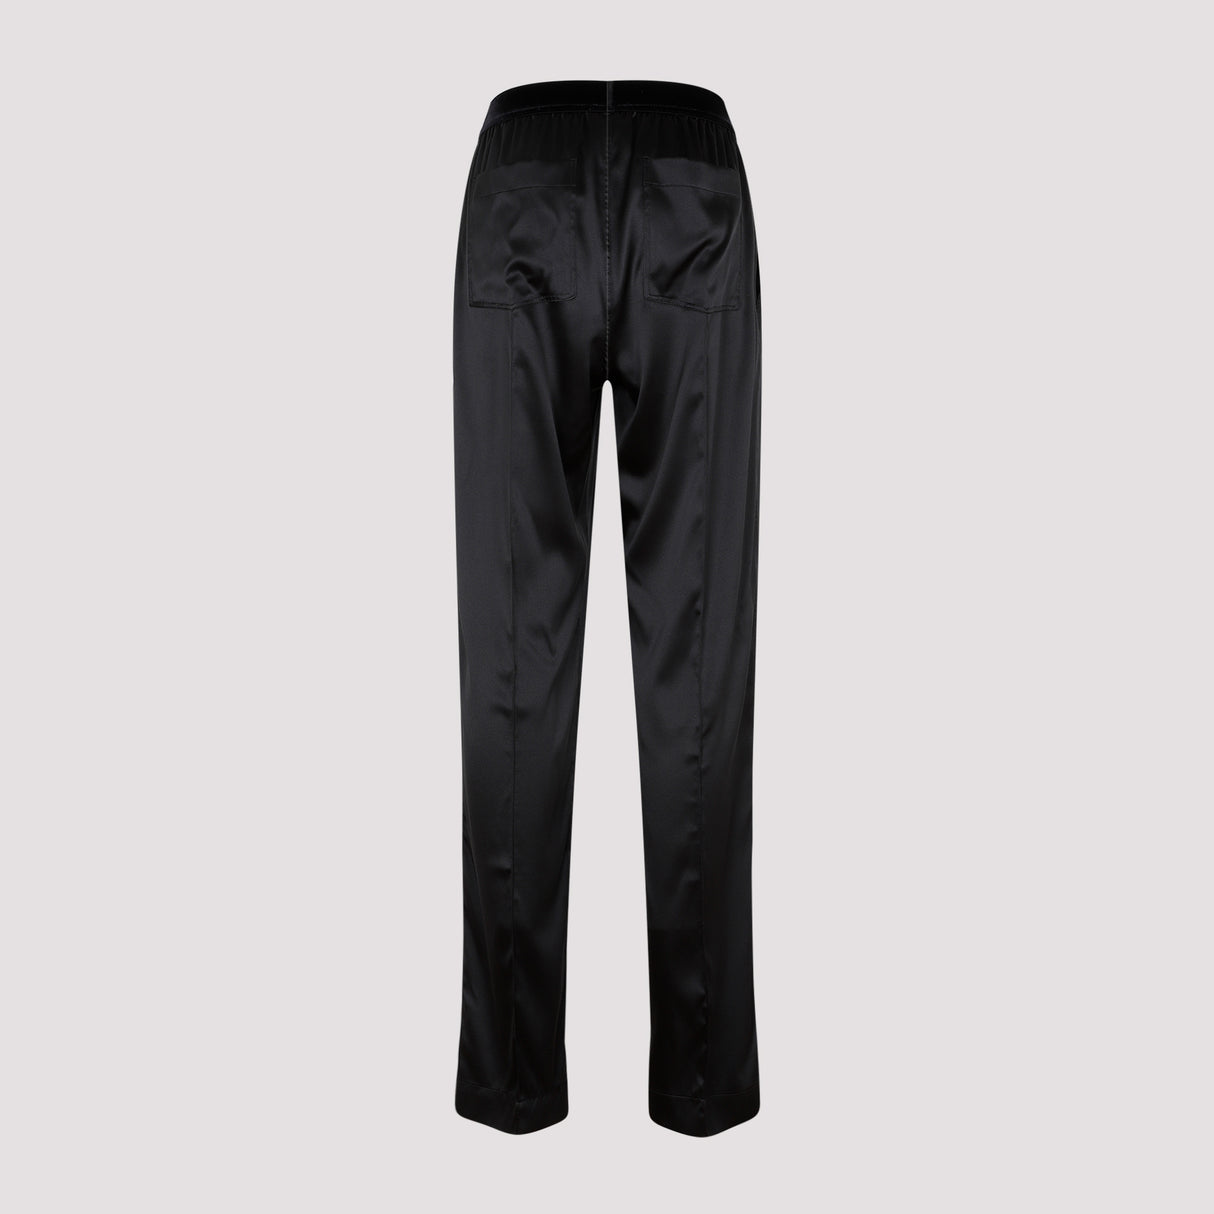 TOM FORD PALAZZO PANTS IN SILK SATIN